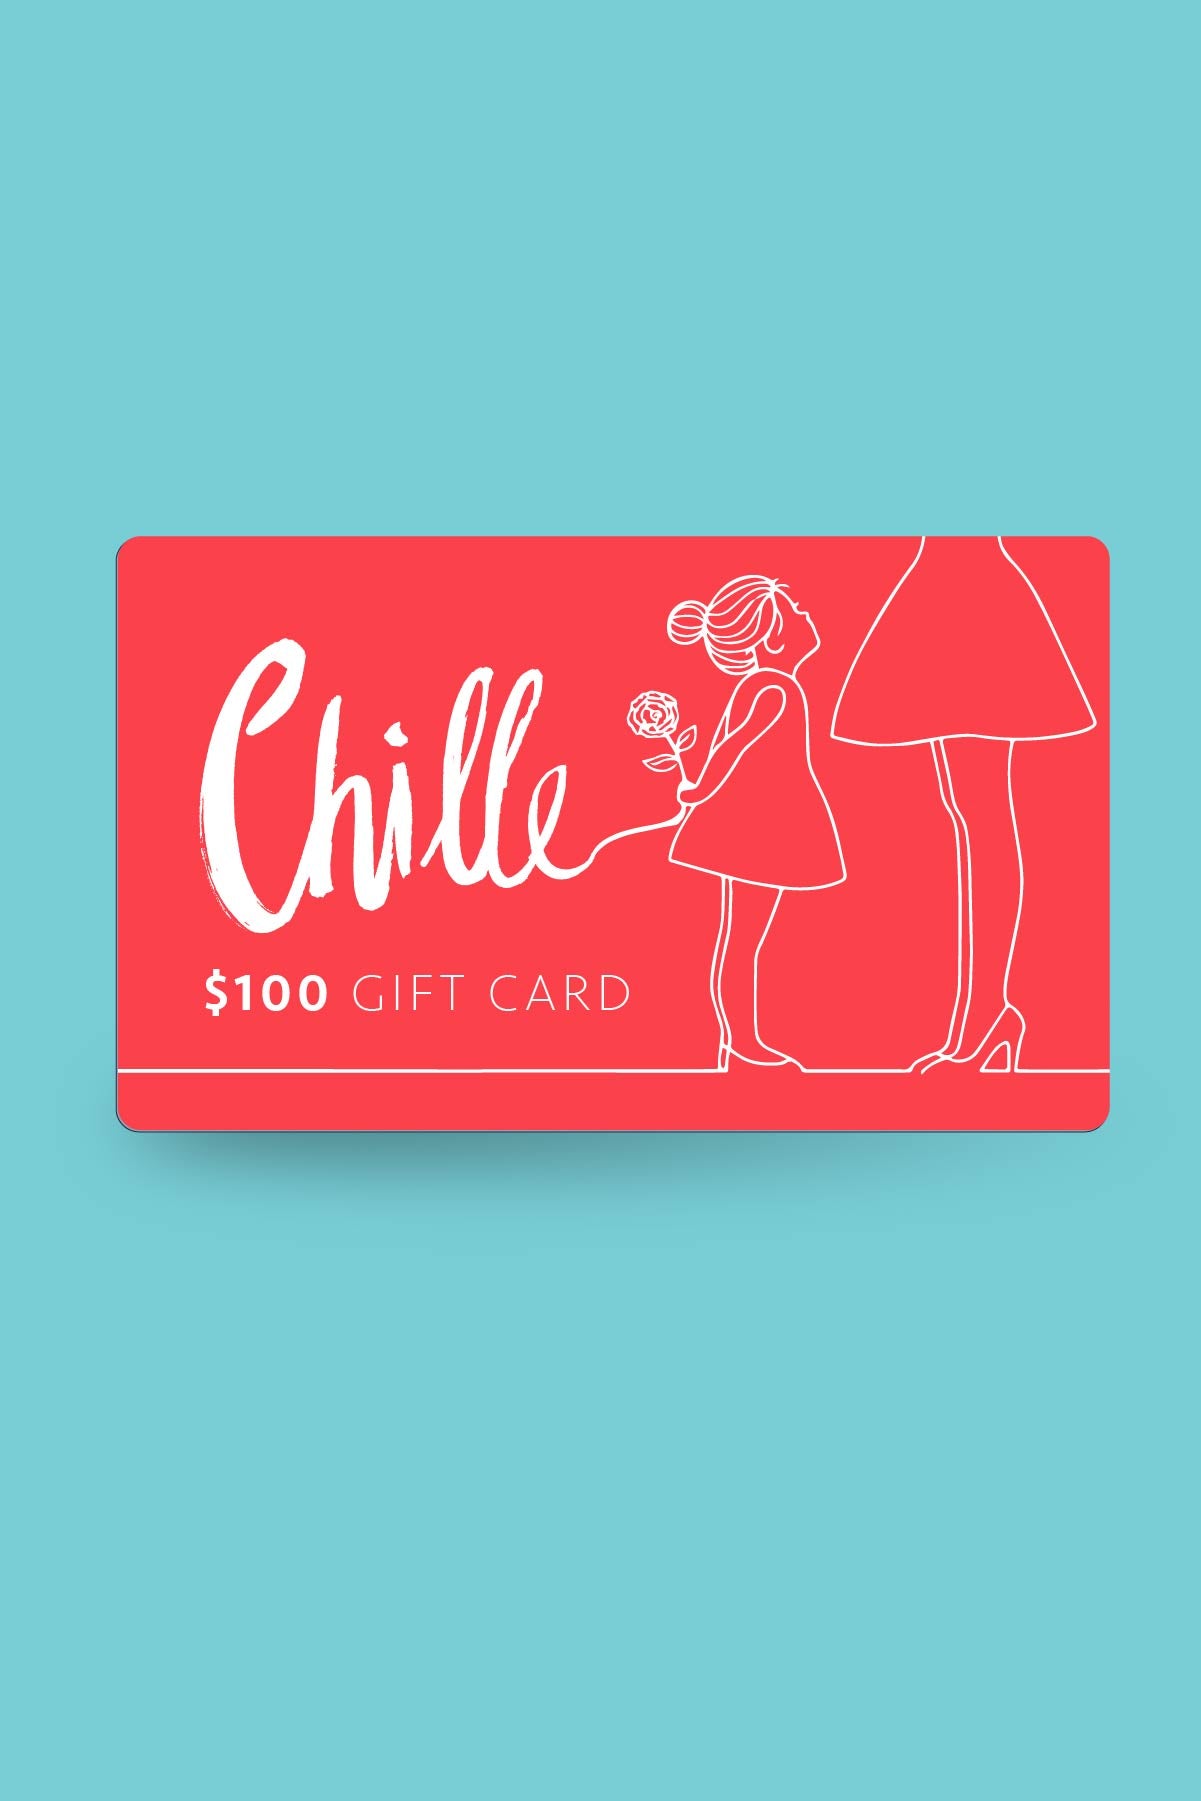 100 dollar Chille gift card